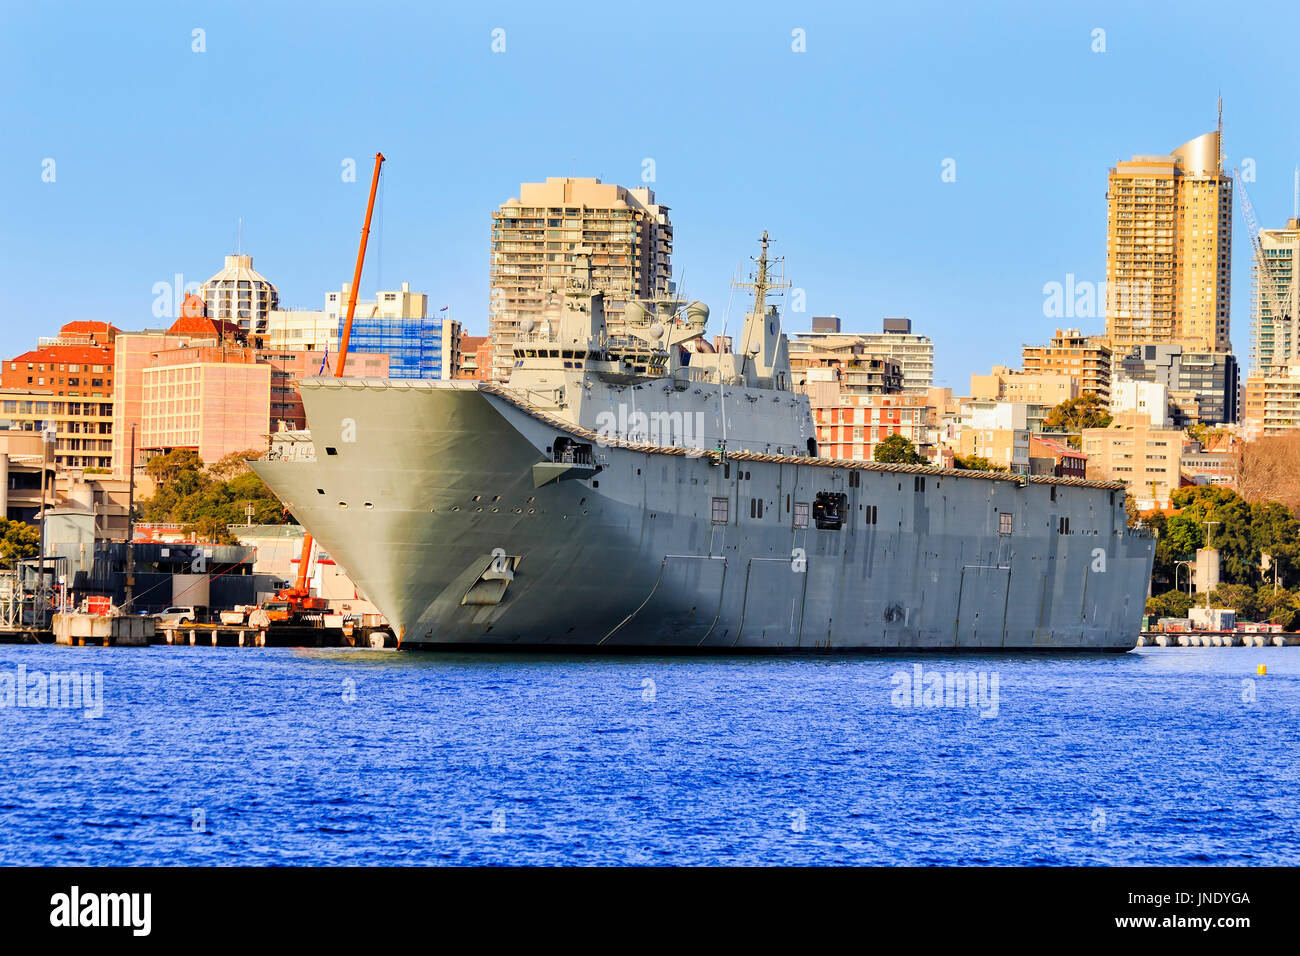 Lead flagship landing helicopter carrier of Canberra-class docked in Sydney Woolloomooloo cowper wharf on military service of Royal Australian Navy. Stock Photo